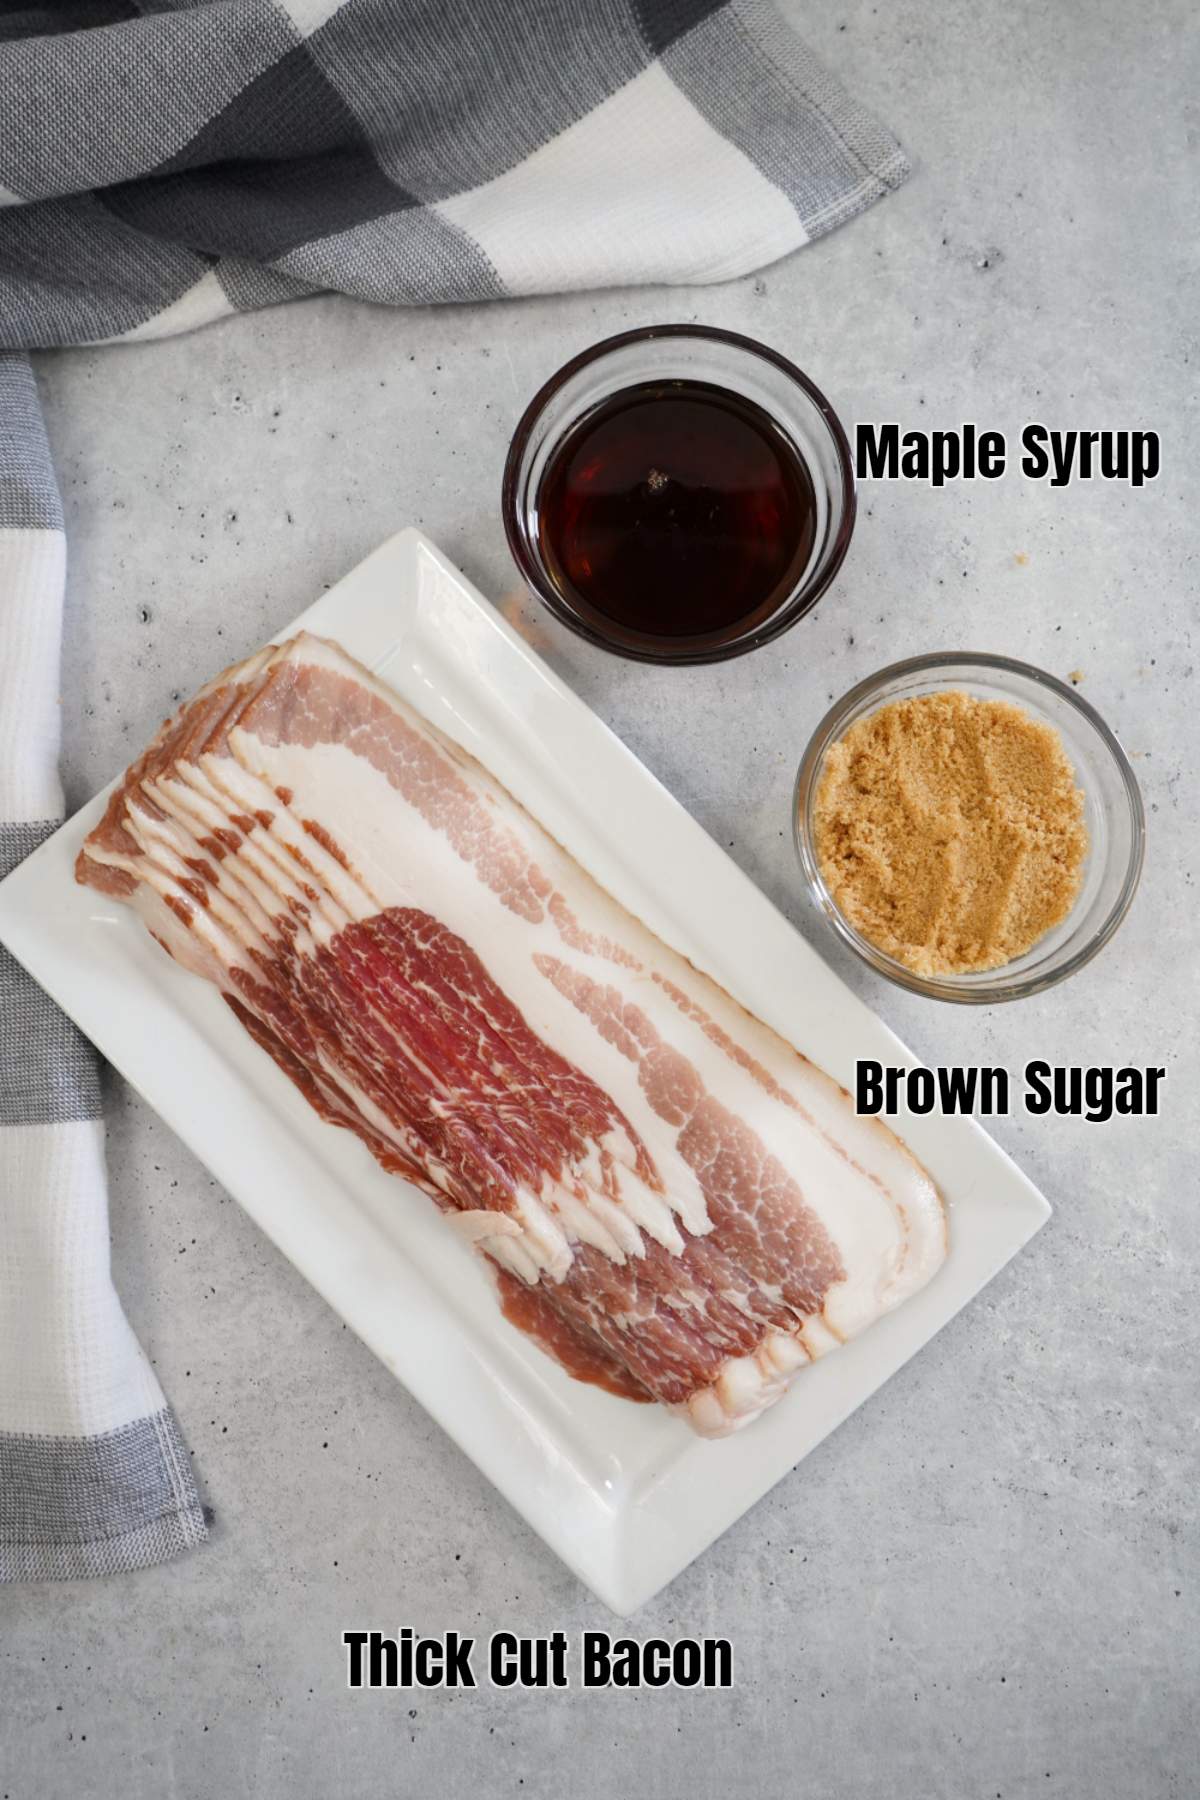 Candied Bacon Ingredients